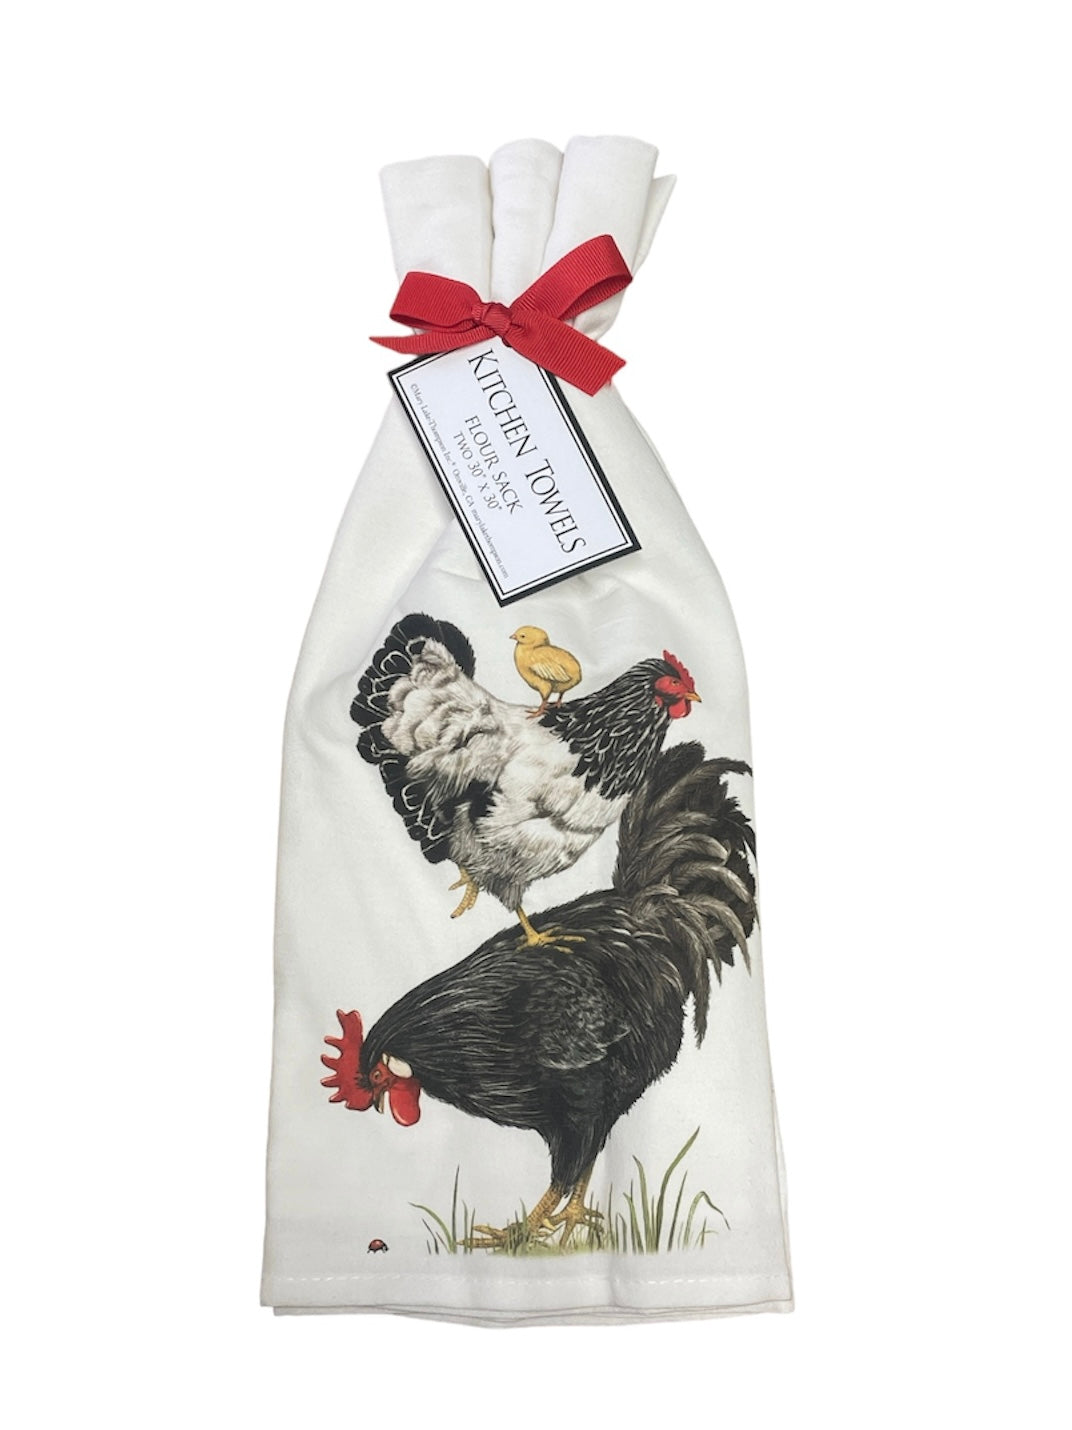 Stacked Chickens Towel Set